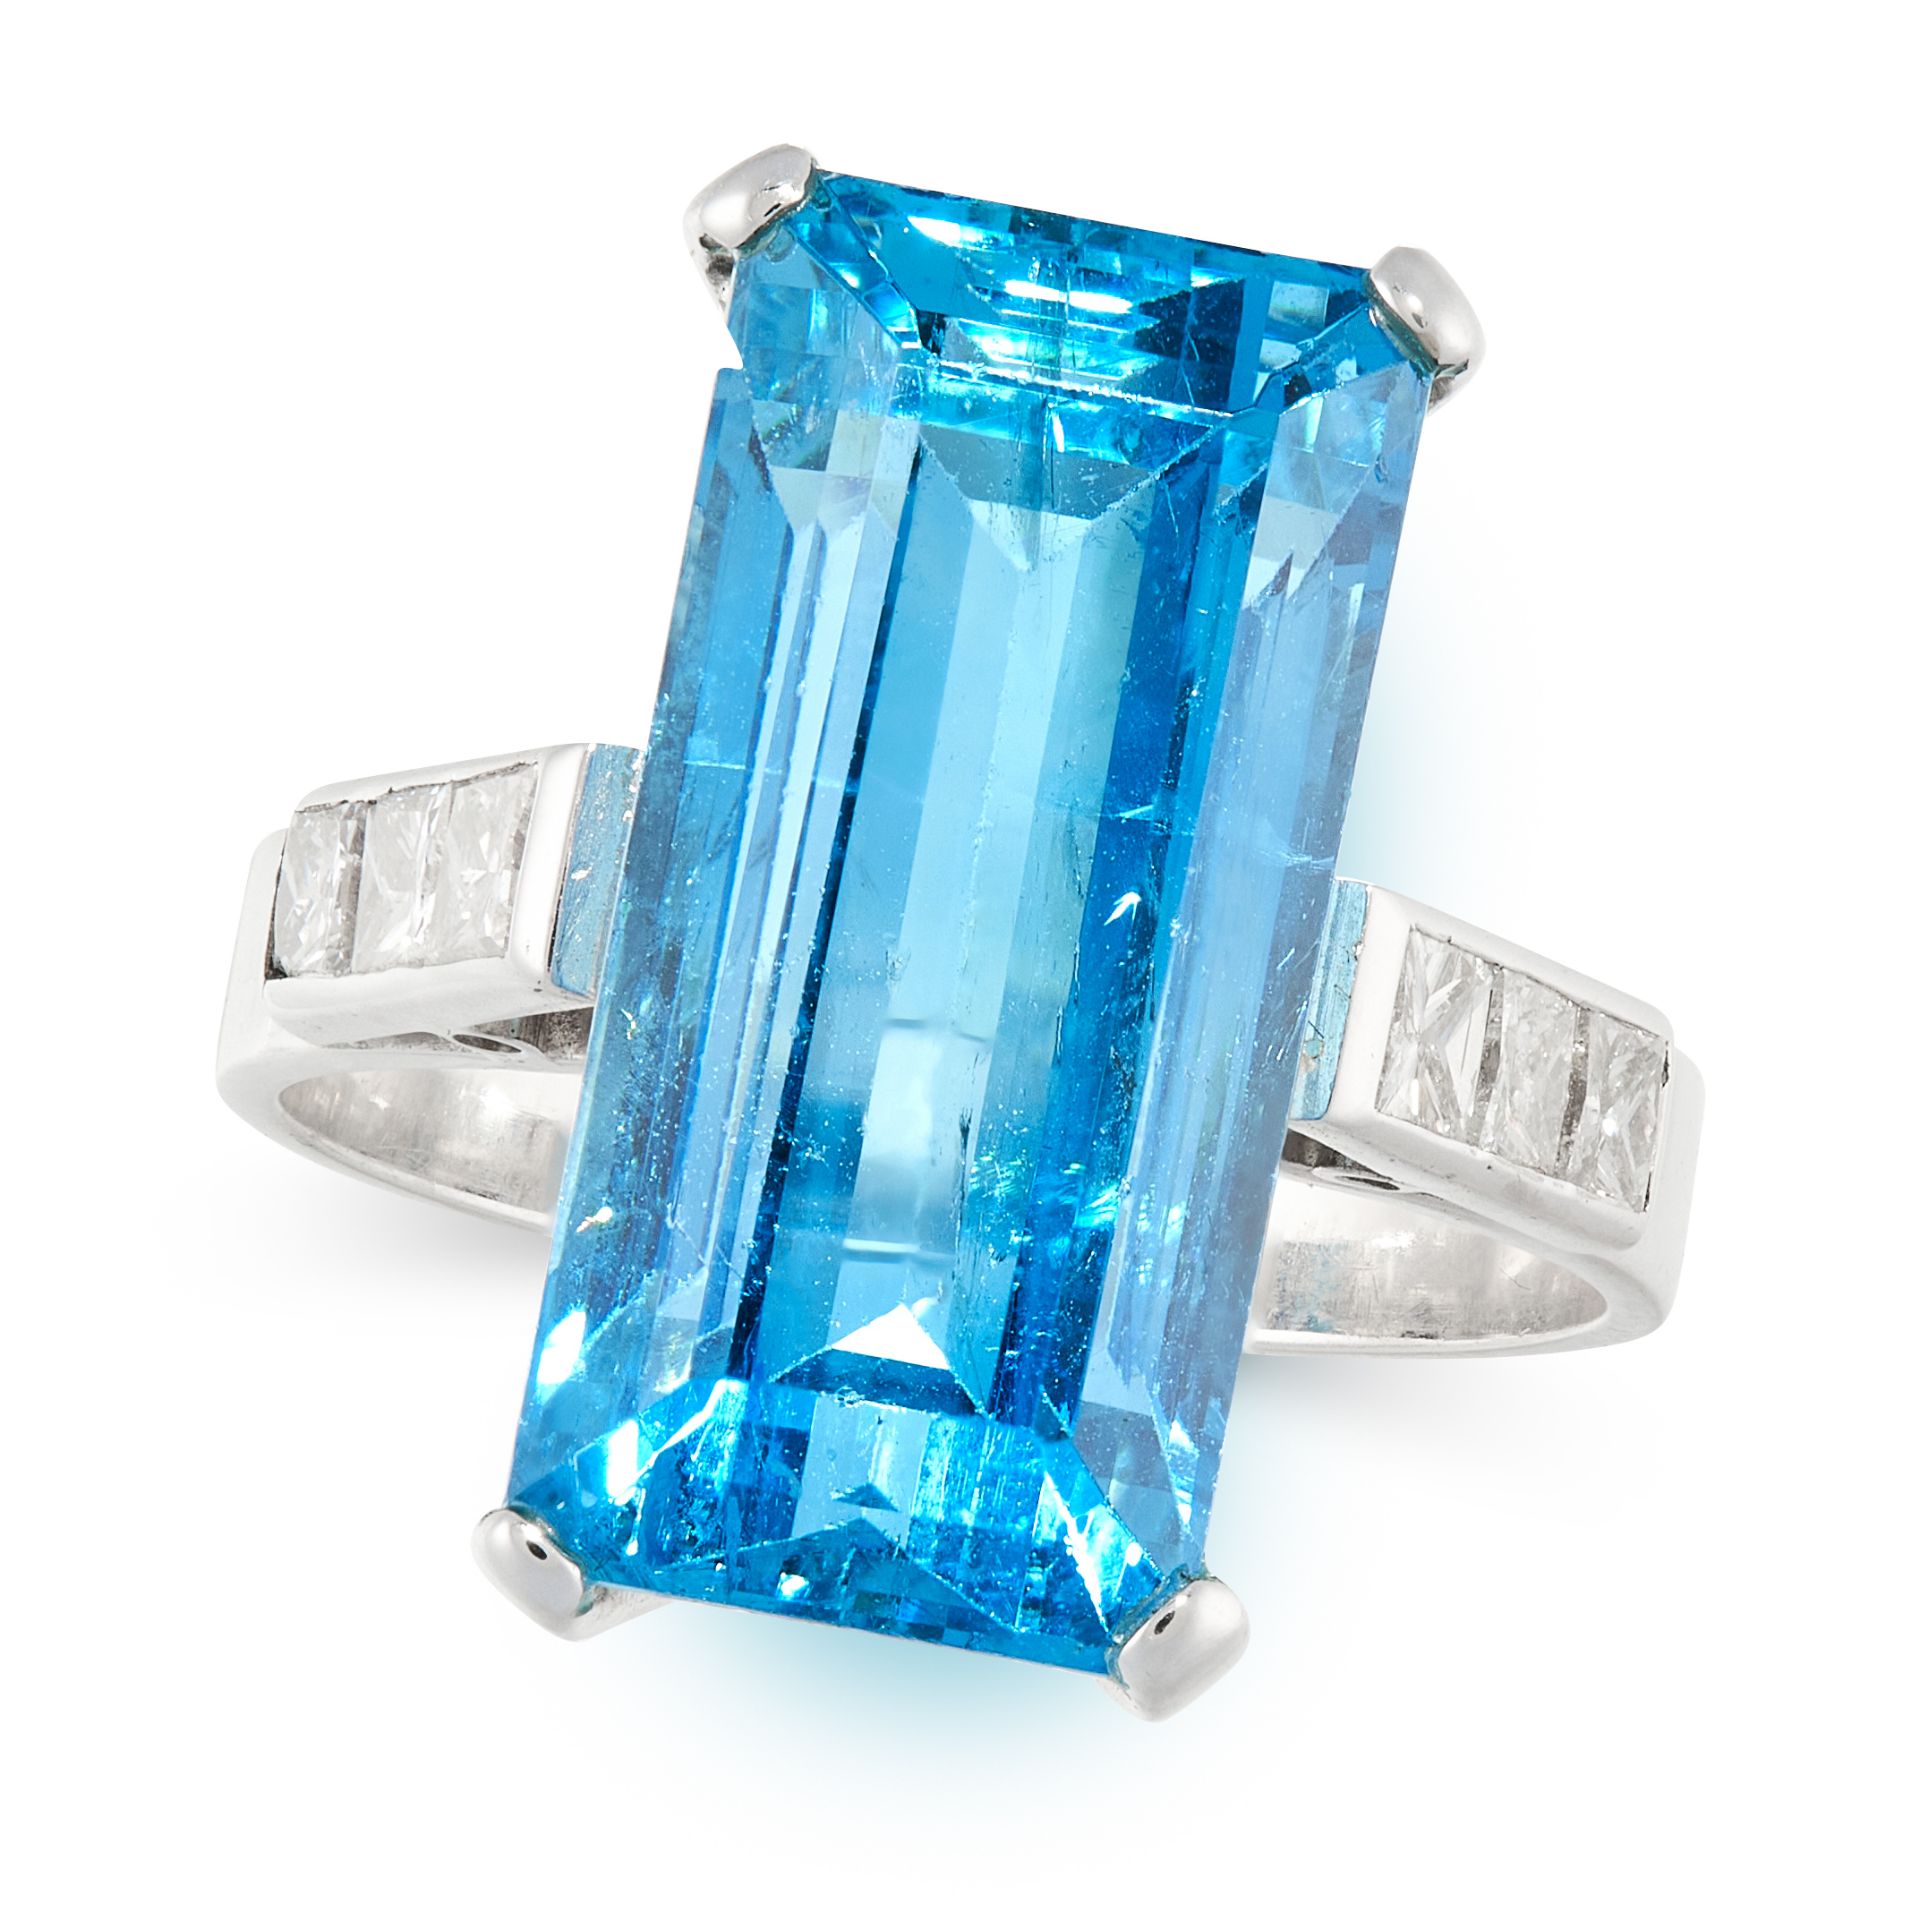 AN AQUAMARINE AND DIAMOND DRESS RING set with an emerald cut aquamarine of 12.58 carats, accented by